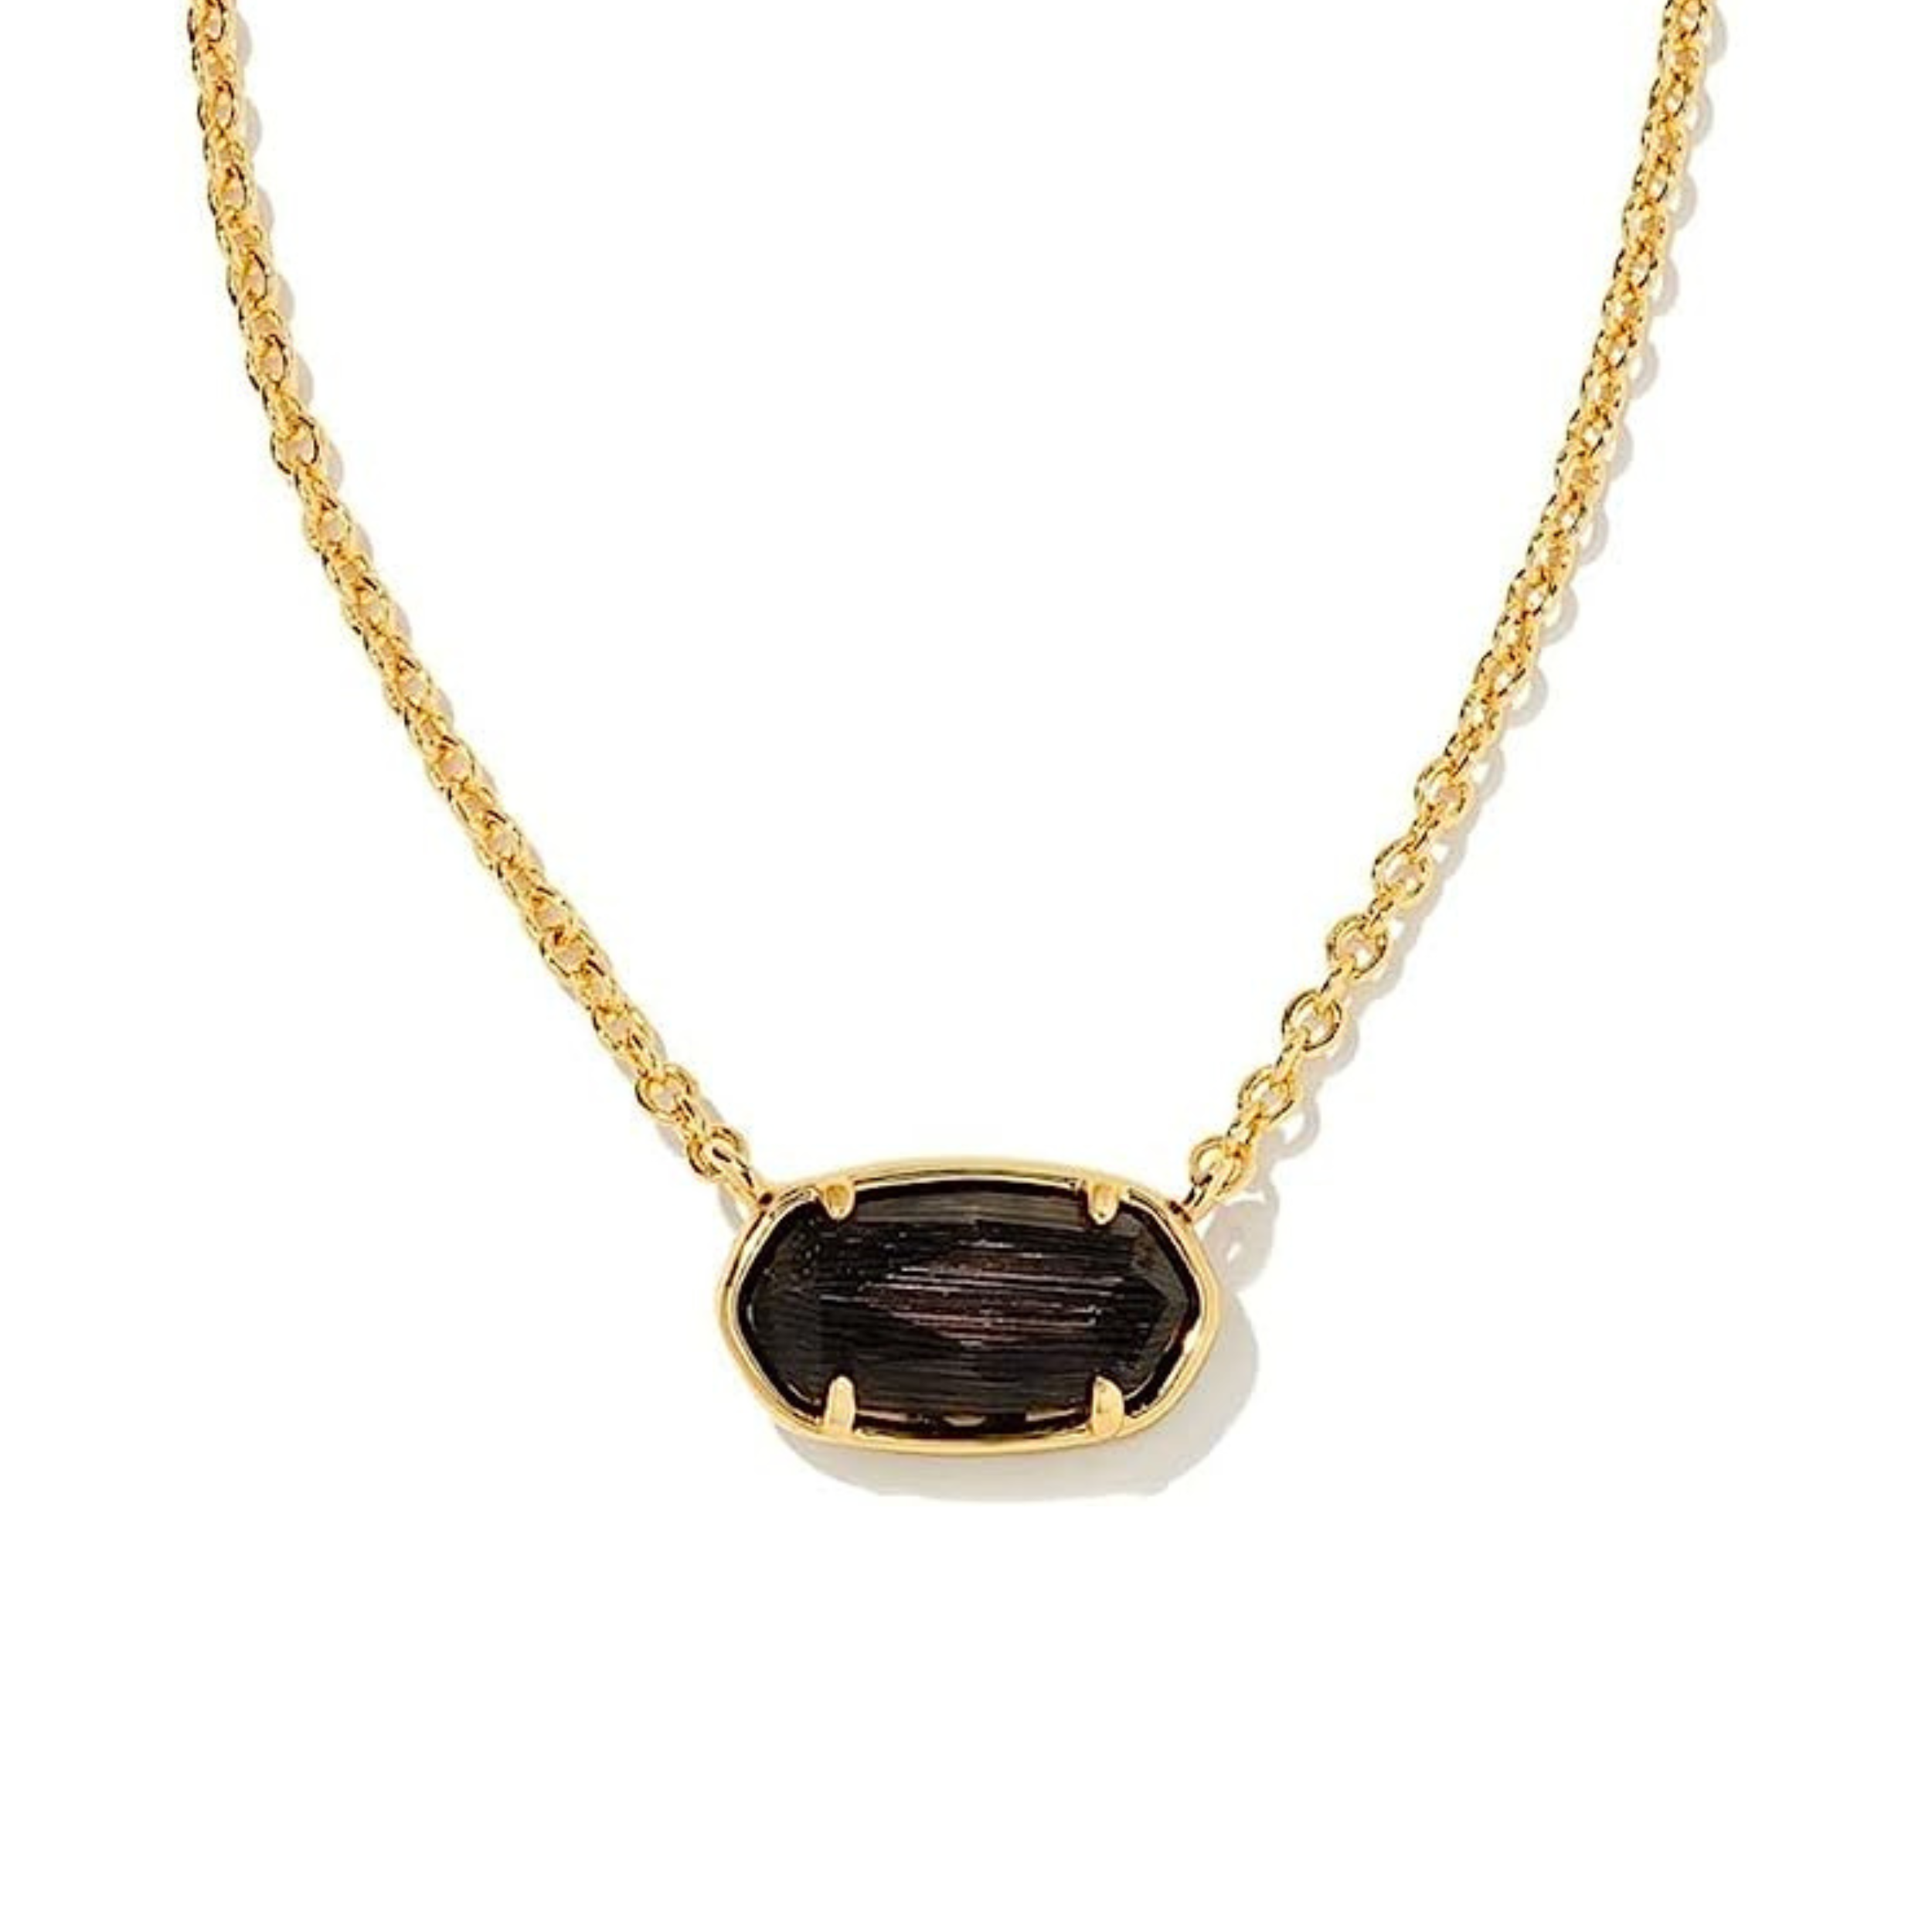 Kendra Scott | Grayson Gold Pendant Necklace in Black Cats Eye - Giddy Up Glamour Boutique